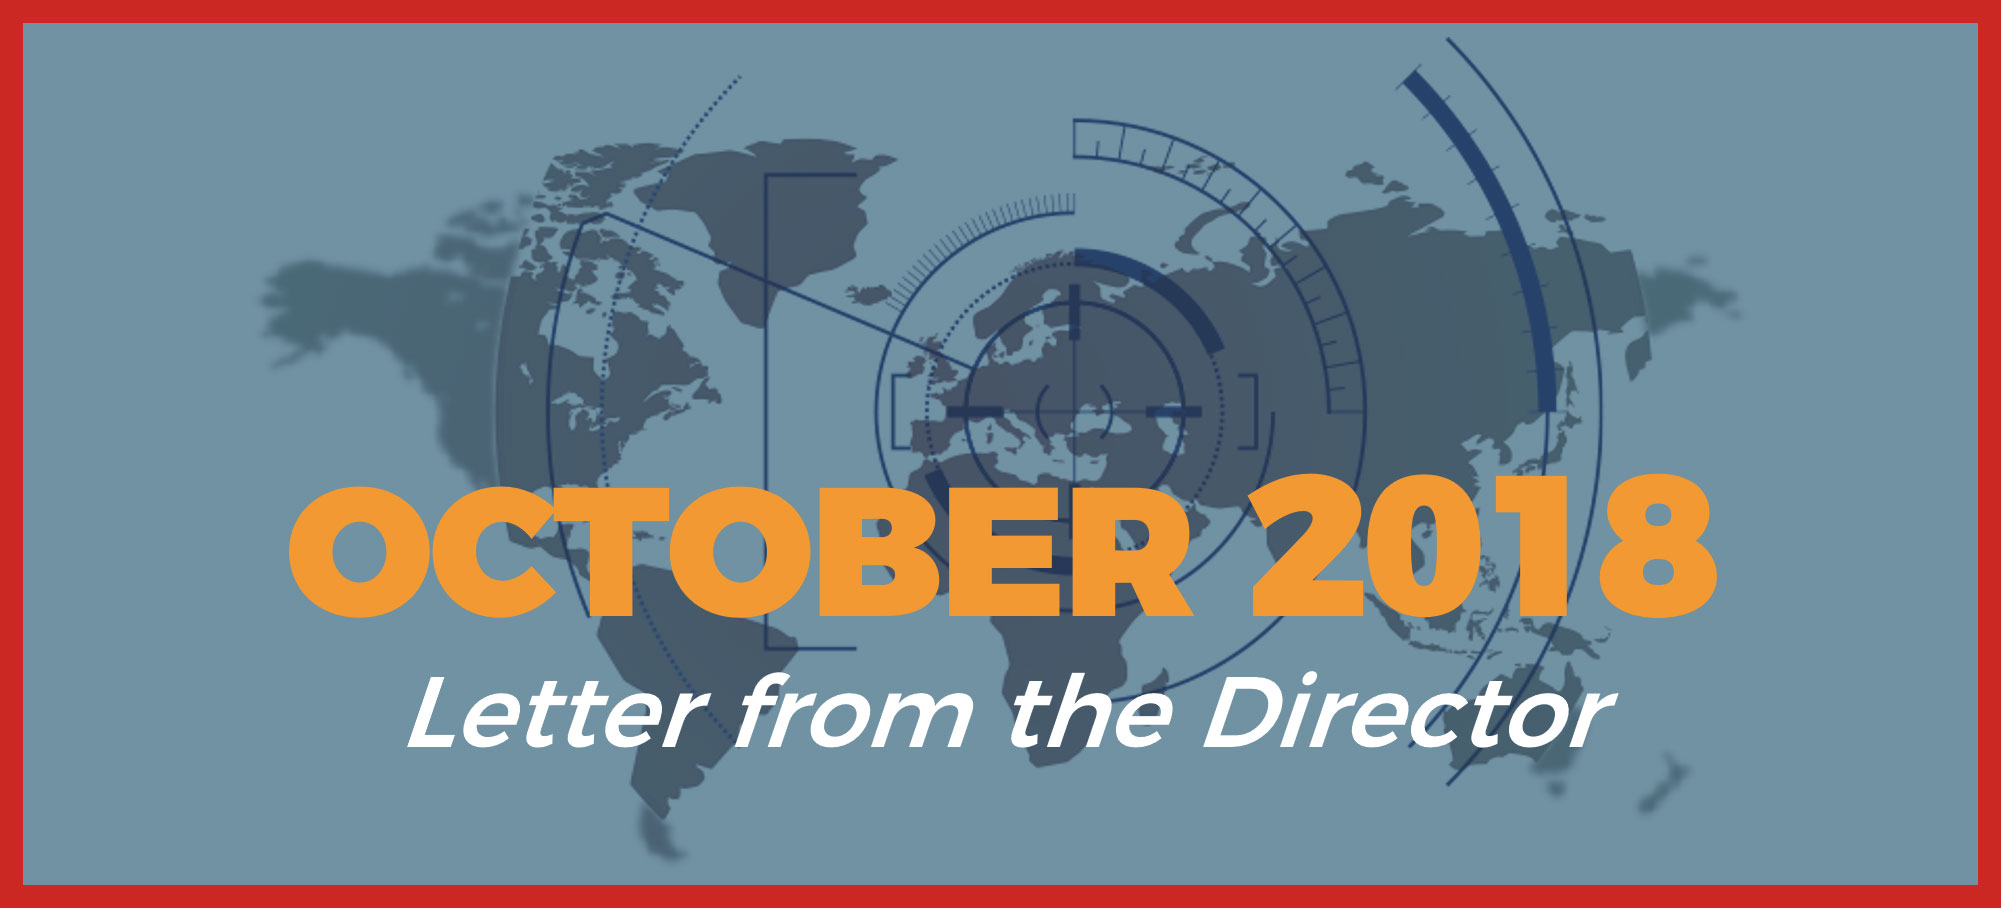 October 2018 Letter from the Director